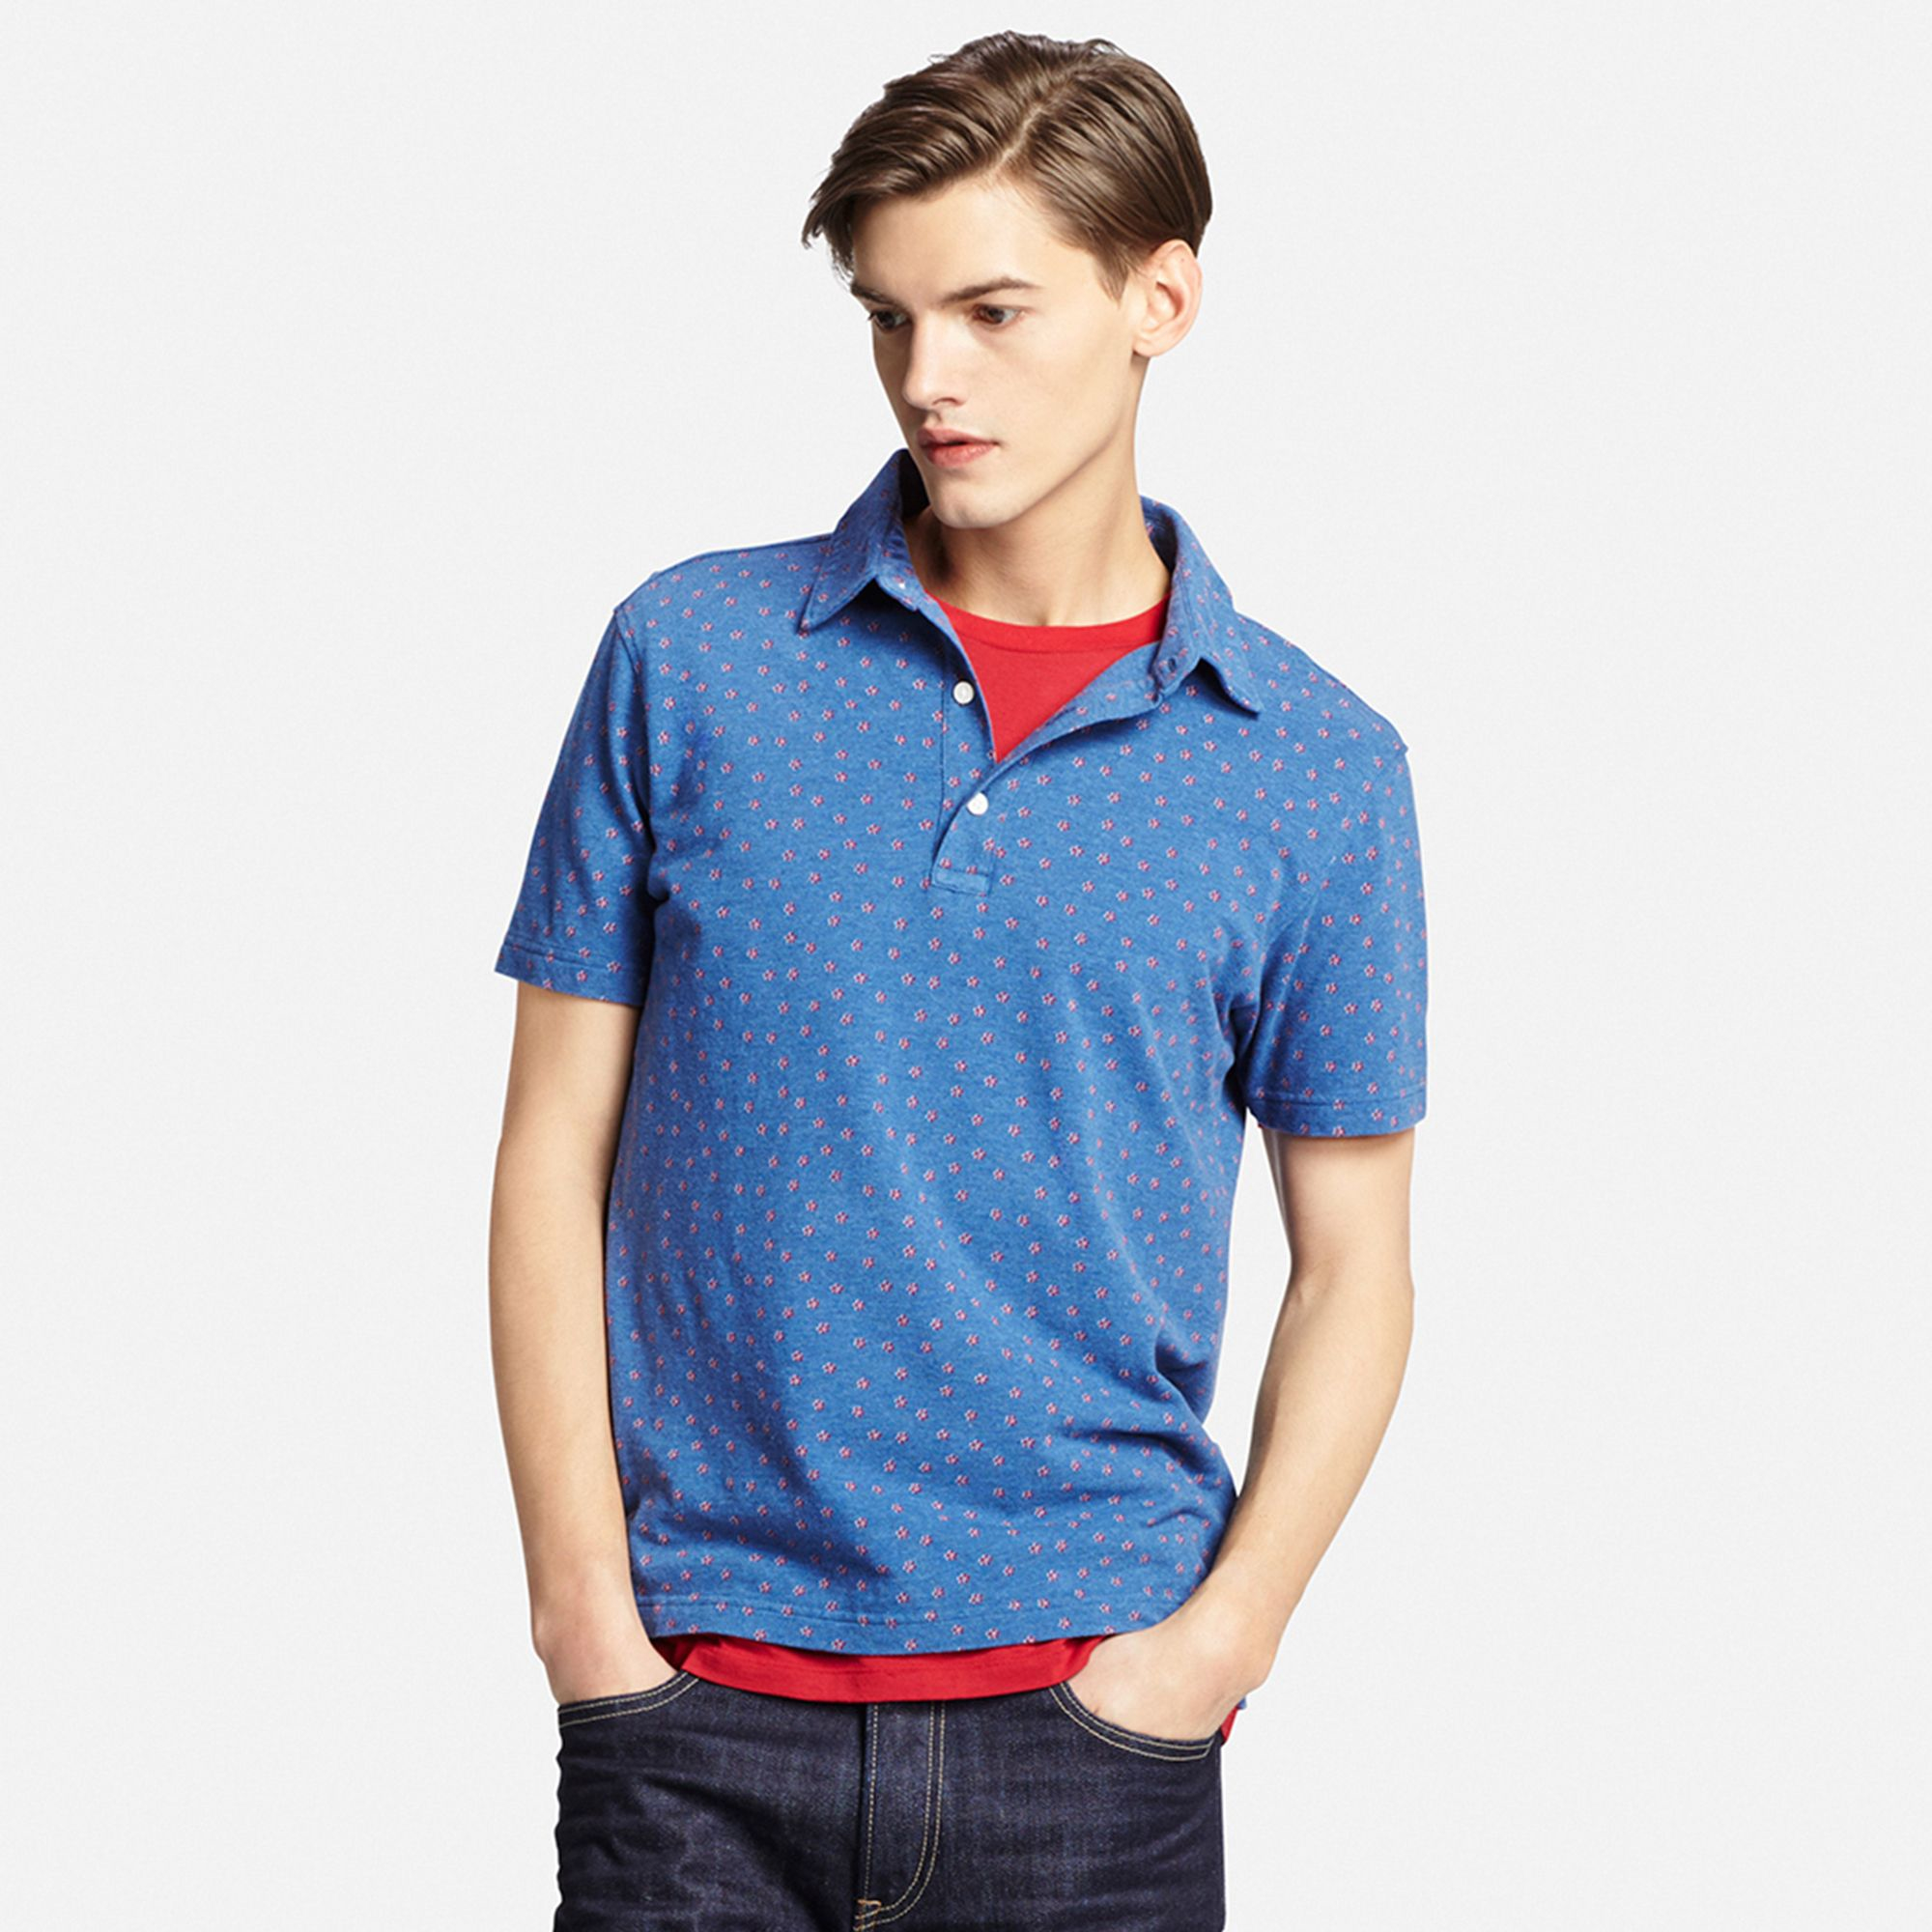 Uniqlo Men's Washed Printed Pique Polo Shirt in Blue for Men (NAVY